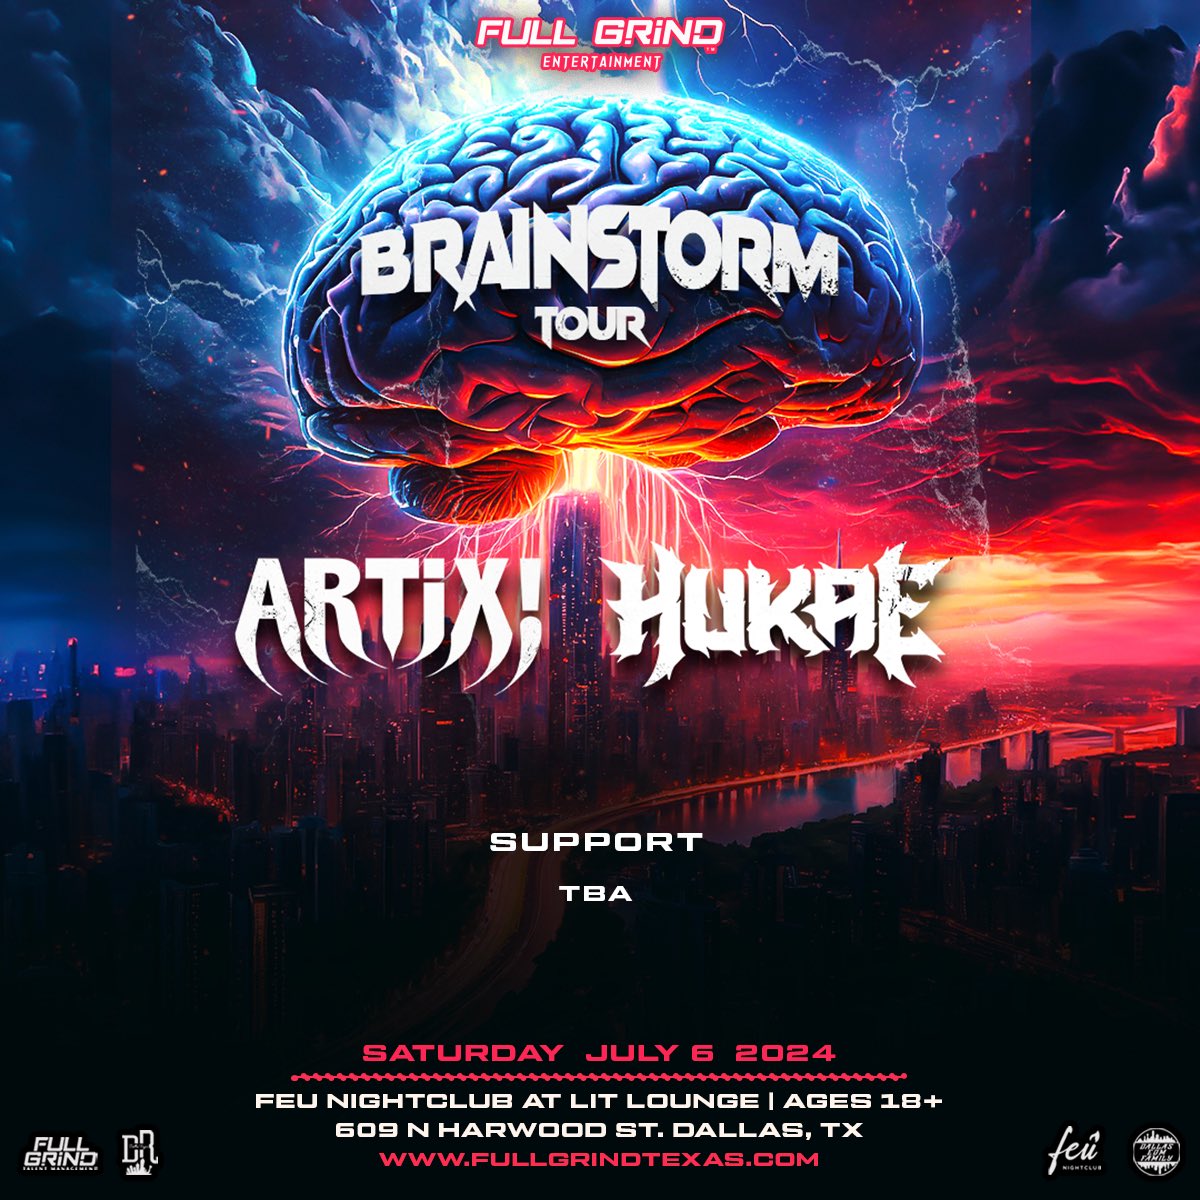 ANNOUNCING: #ARTIX & #HUKAE Brainstorm Tour 🧠 ⛈️ in Dallas & Houston, Tx this summer! ⚔️😈⚔️ Support to be announced… 🙊🙈 7/05 — 9pm Music Venue • HTX 7/06 — Feu Nightclub at Lit Lounge • DTX